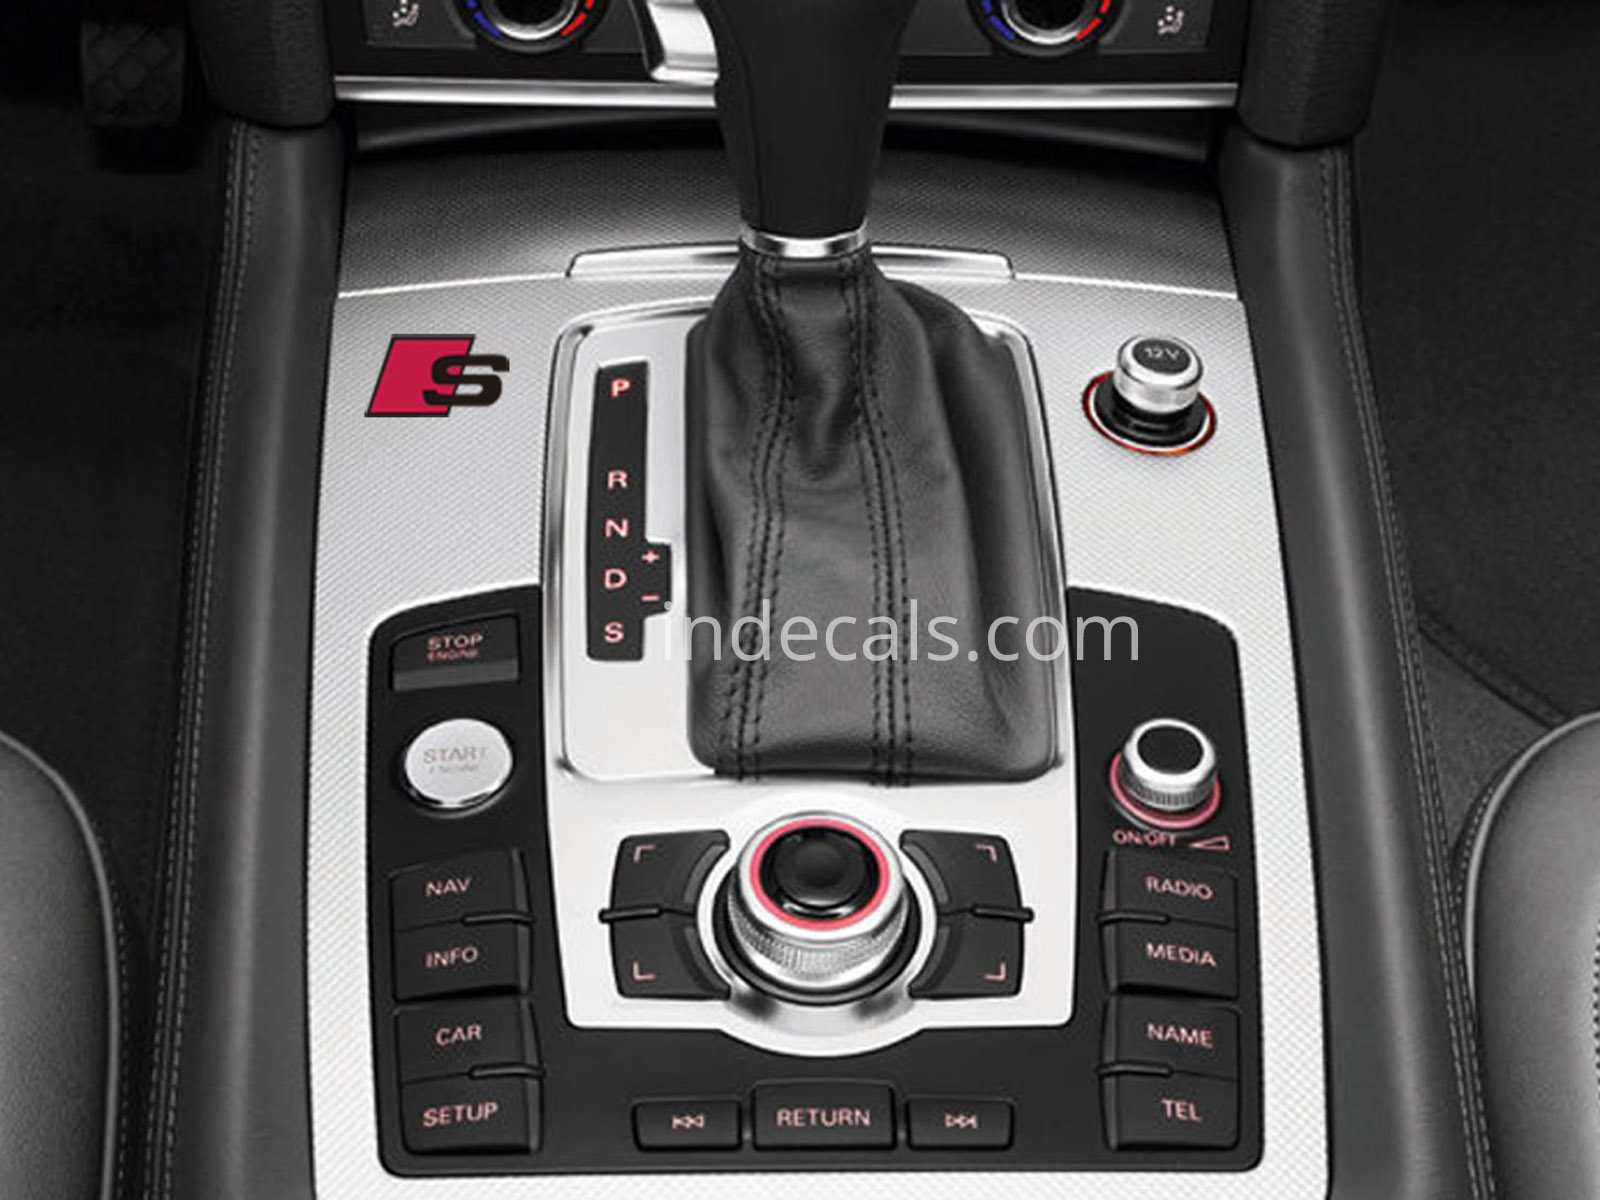 2 x Audi S-Line Stickers for Center Console - Black + Red